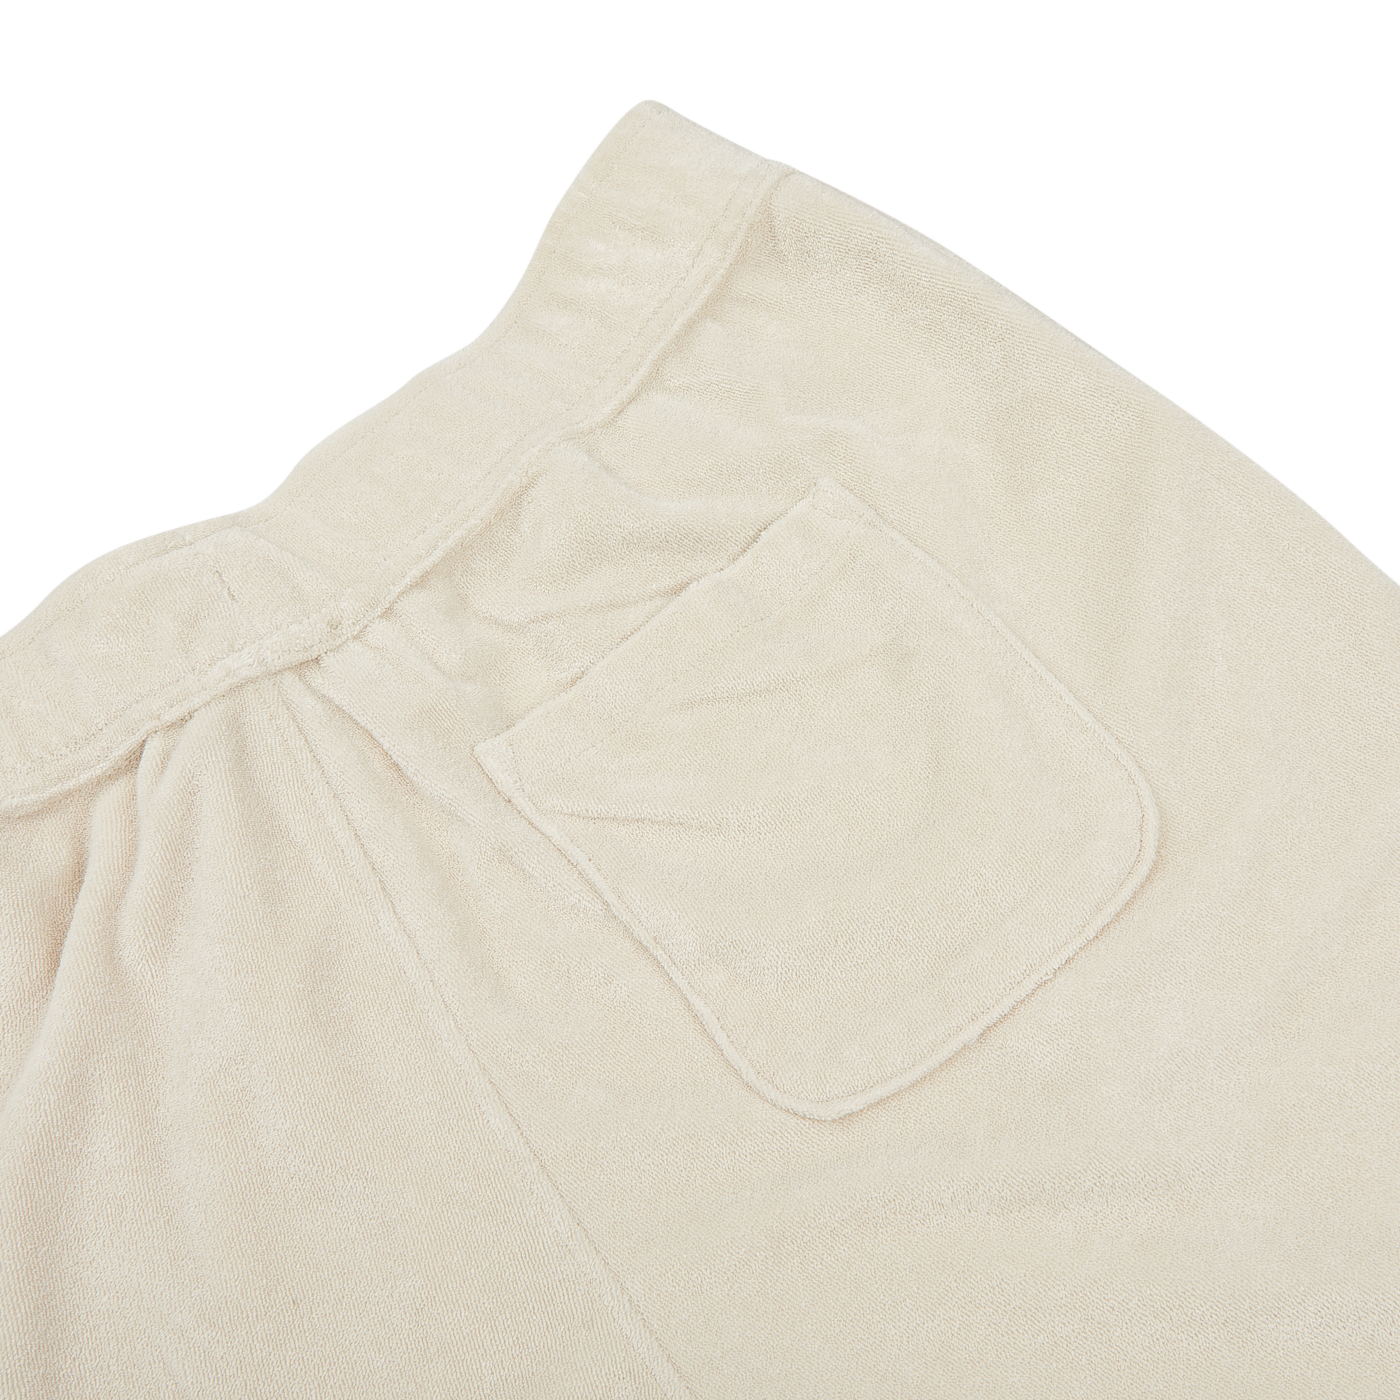 Close-up of the back pocket and waistband area of a pair of Paige Cream Beige Cotton Towelling Shorts, showing the fabric texture, stitching details, and a comfortable drawstring waist.